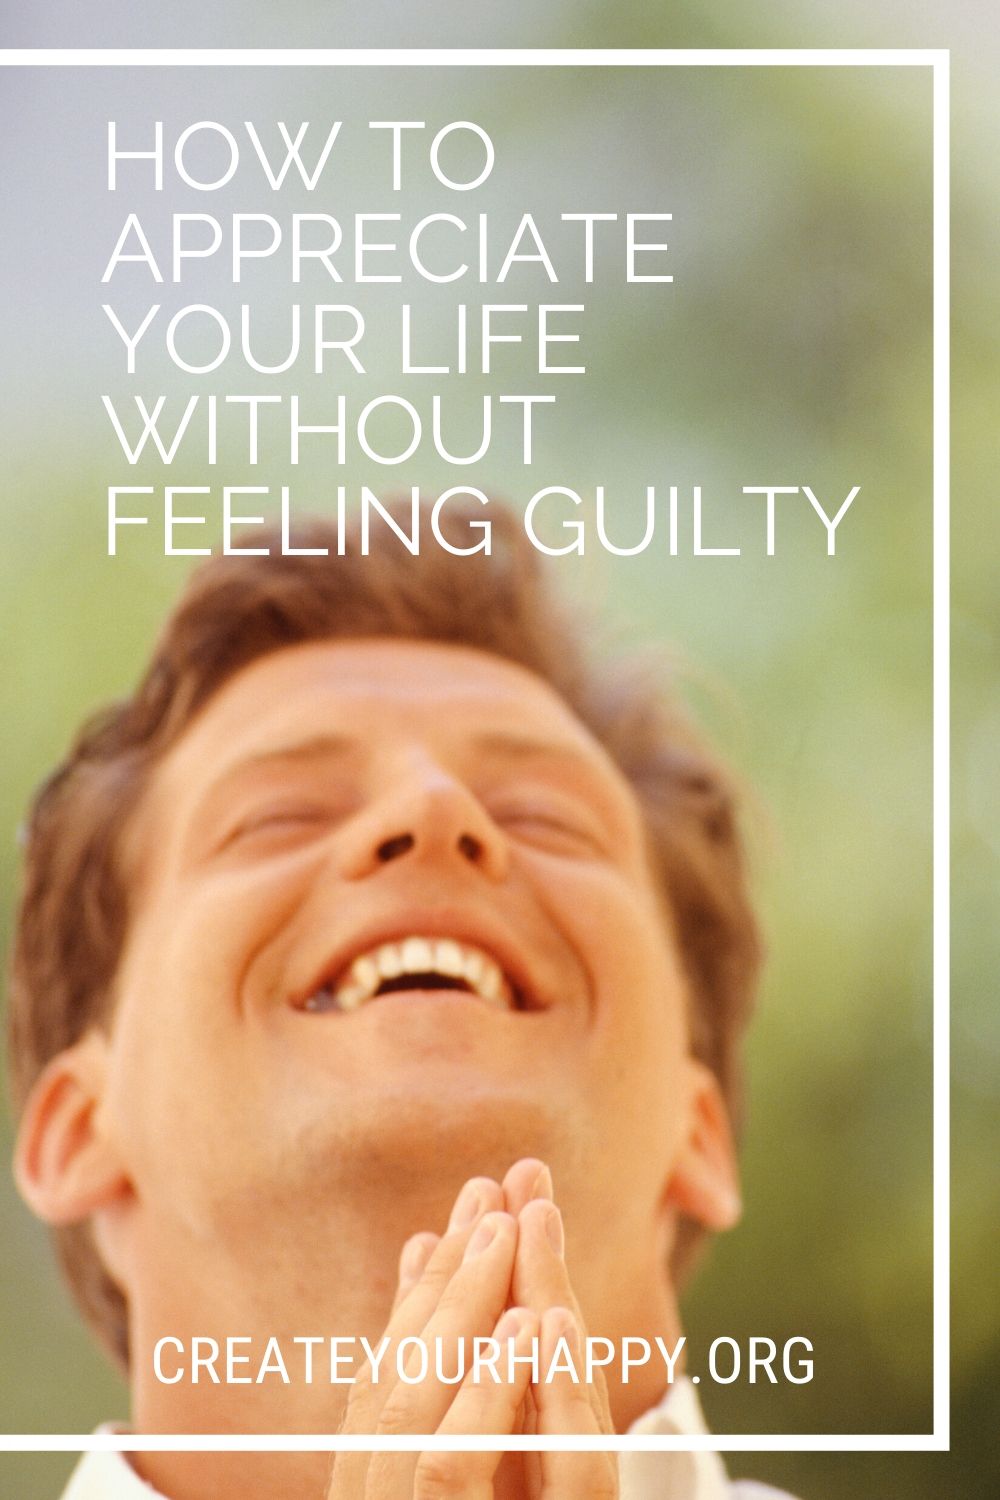 How to Appreciate Your Life Without Feeling Guilty